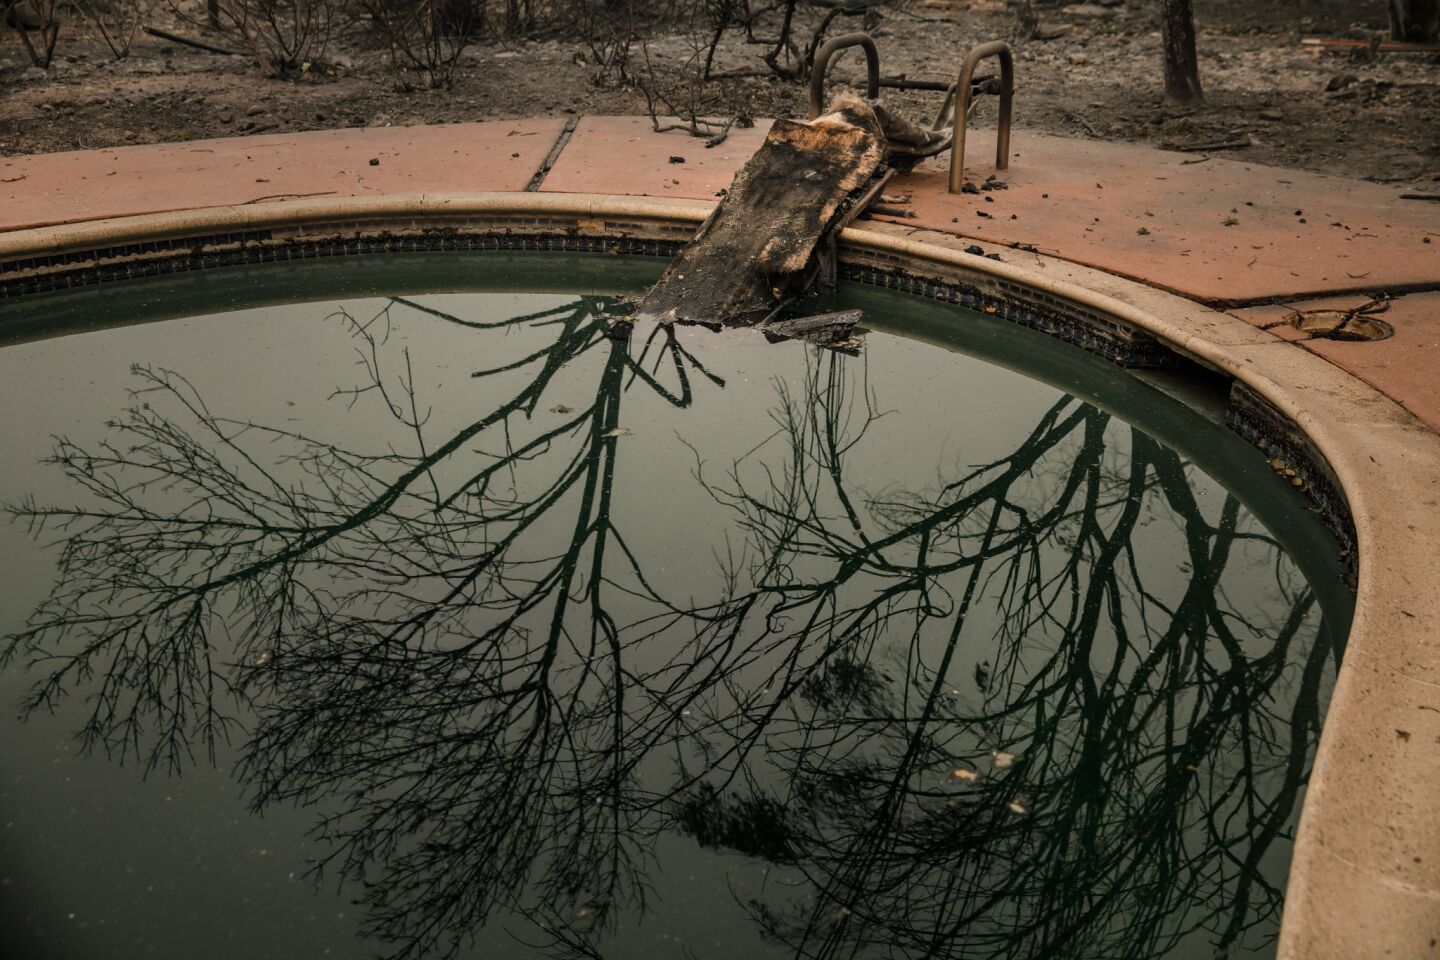 A swimming pool reflects the damage caused by the wildfires that moved through neighborhoods near Glen Ellen.